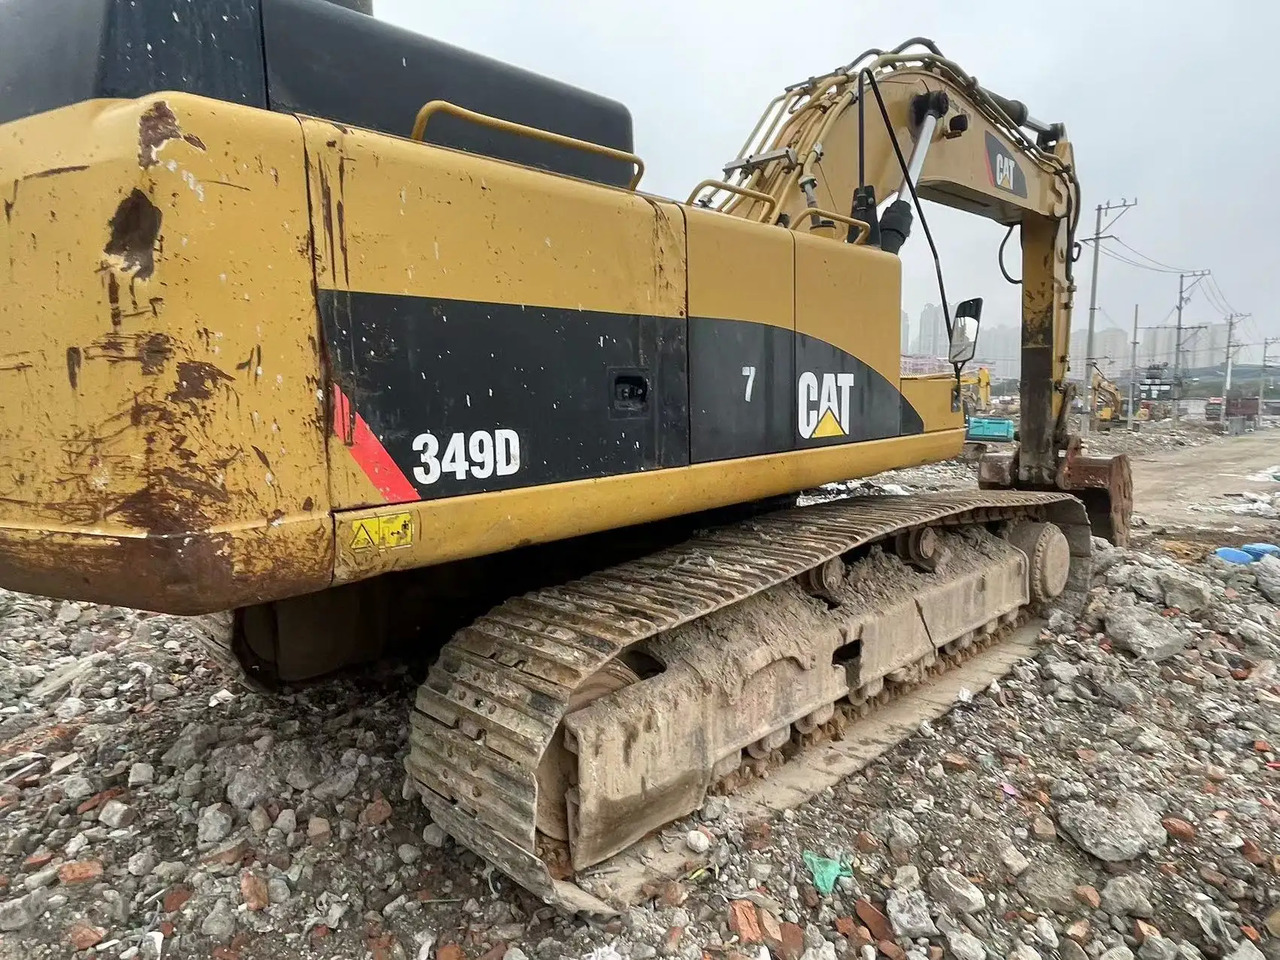 Heavy Duty Caterpillar Digging Machinery Excellent Working Condition Used Cat 349d Excavator In Shanghai lizingą Heavy Duty Caterpillar Digging Machinery Excellent Working Condition Used Cat 349d Excavator In Shanghai: foto 2